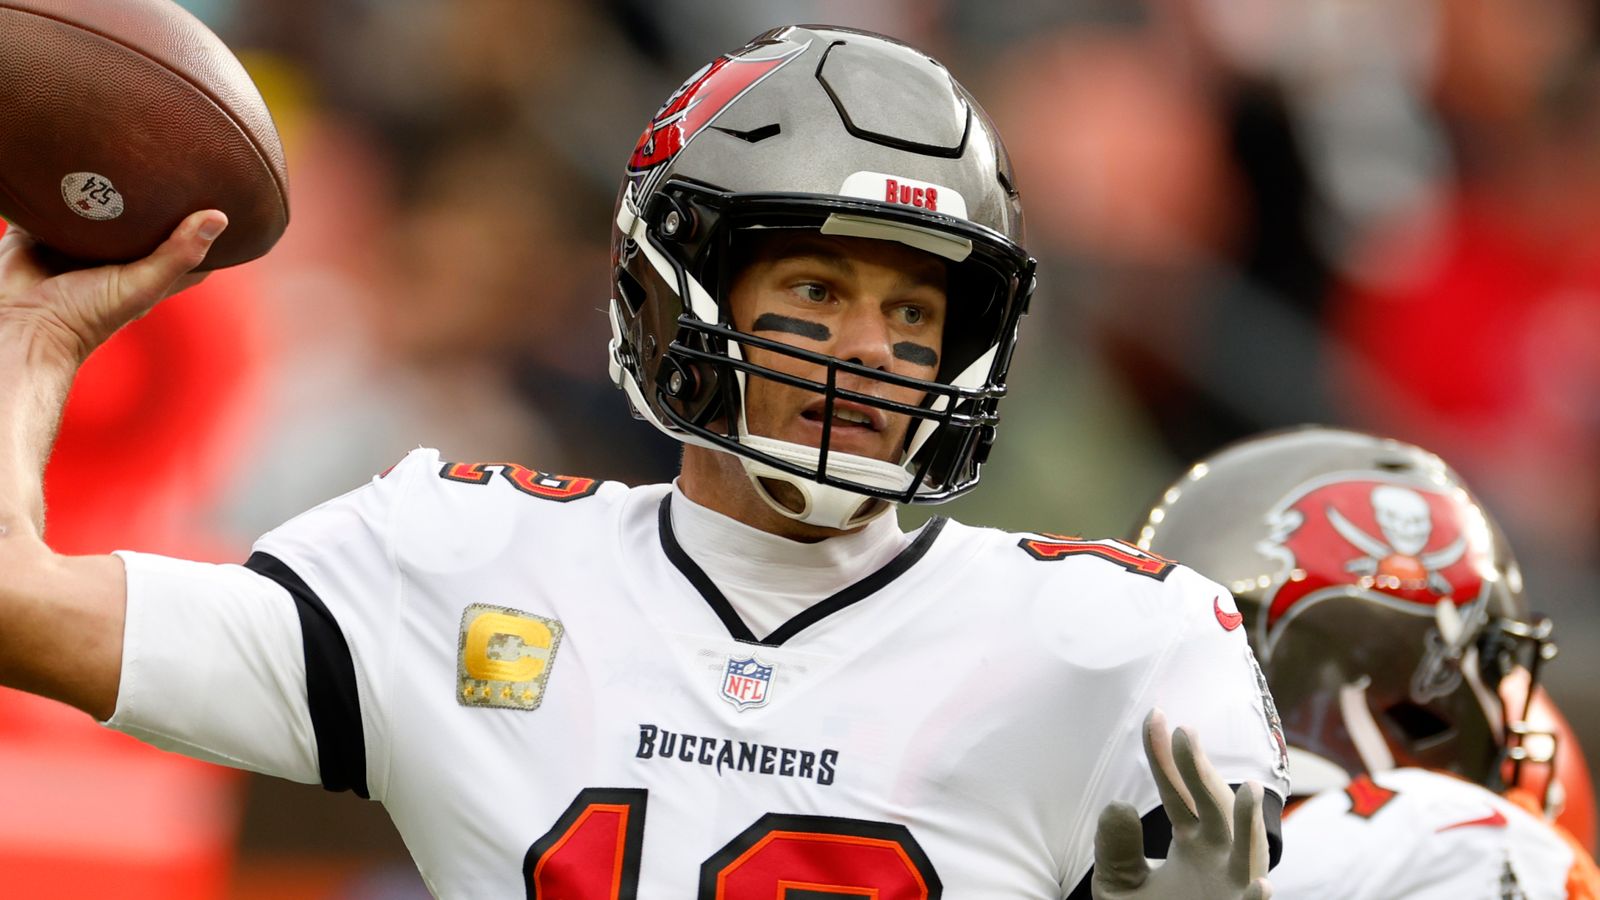 Tom Brady: Tampa Bay Buccaneers QB hopes the team’s best is still ‘ahead of us’ as they prepare for New Orleans Saints clash |  NFL News